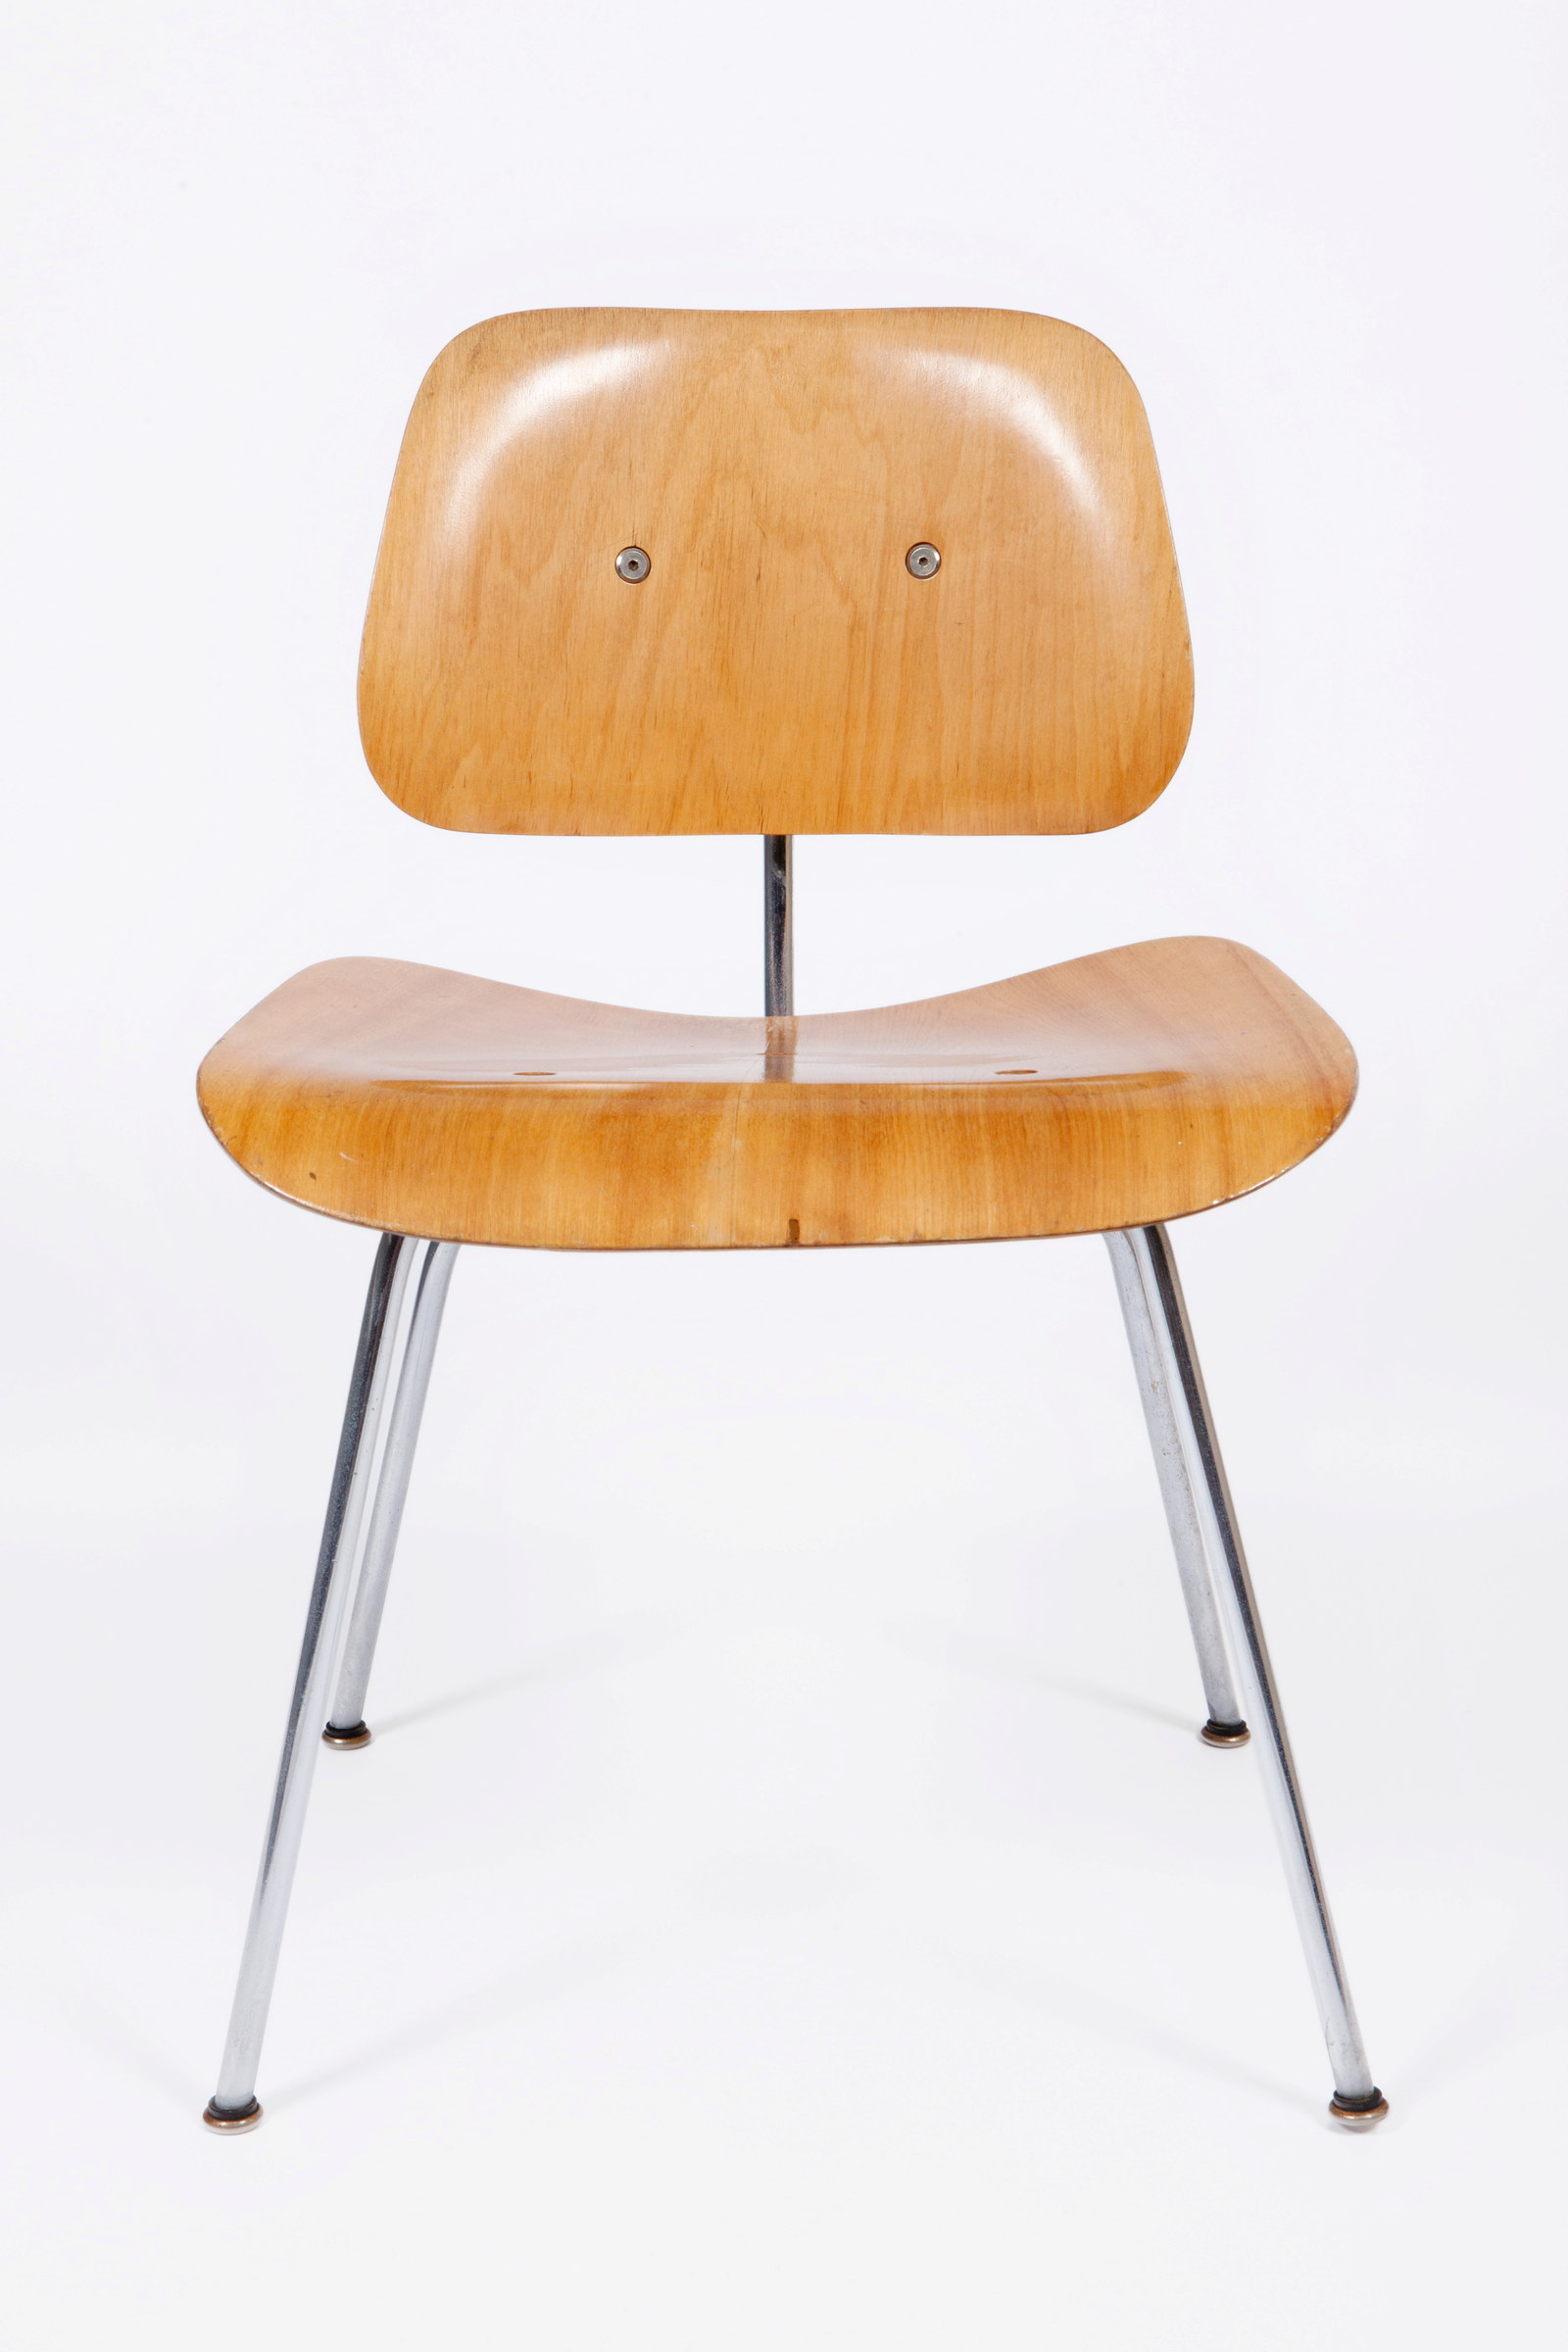 'DCM' dining chair, designed by Charles & Ray Eames for Evans Products Company, USA, 1948.